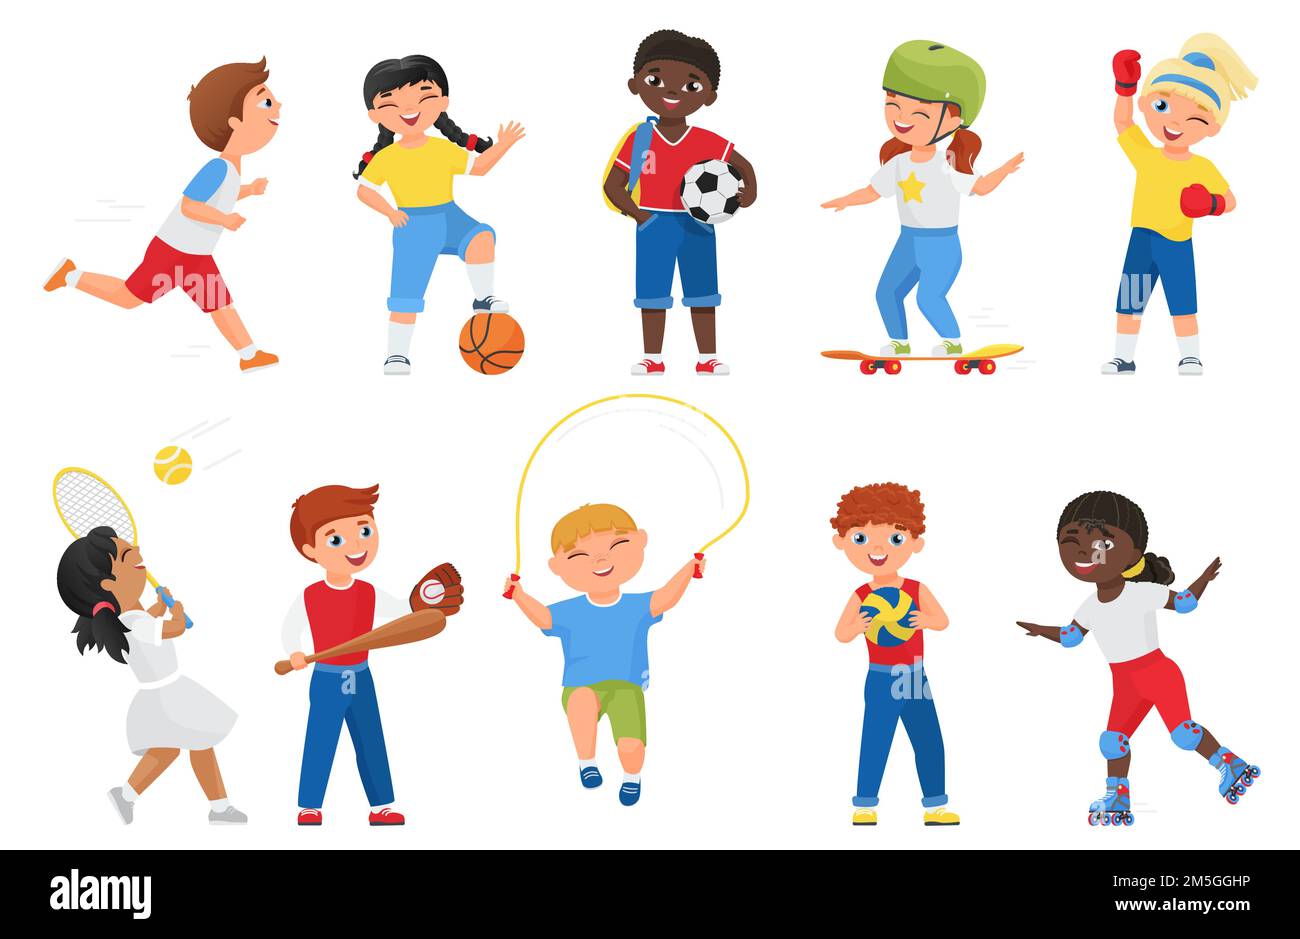 Kids playing various sports vector illustration. Happy cute kids